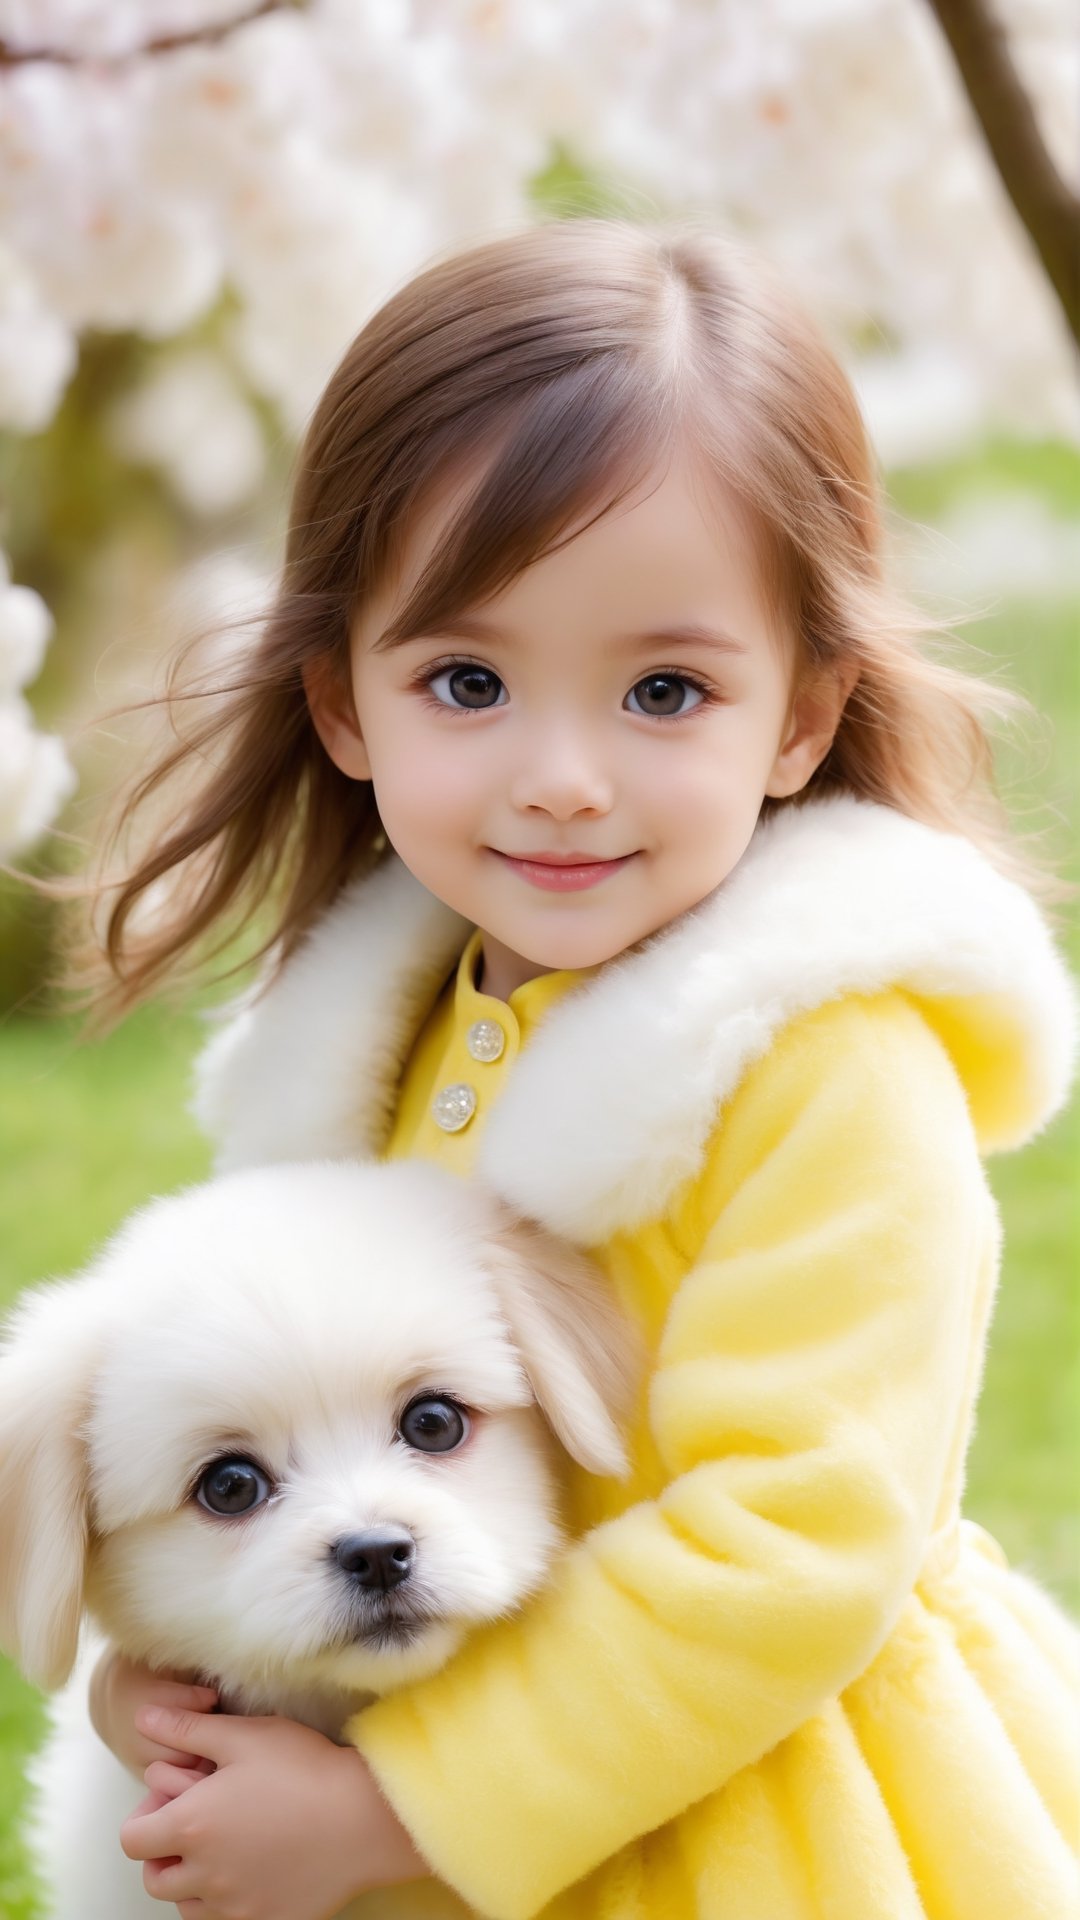 Evoke pure joy with a high-detailed scene of a cute, beautiful big eyes so adorable little girl wearing fluffy light yellow and white dress and coat, playing with a fluffy puppy. Capture the innocence and happiness in their interaction, ensuring the image radiates warmth and charm.happiness and enjoy the best moment to smiling, high quality portrait photography, flowers bloom beautiful bokeh background.
,3DMM